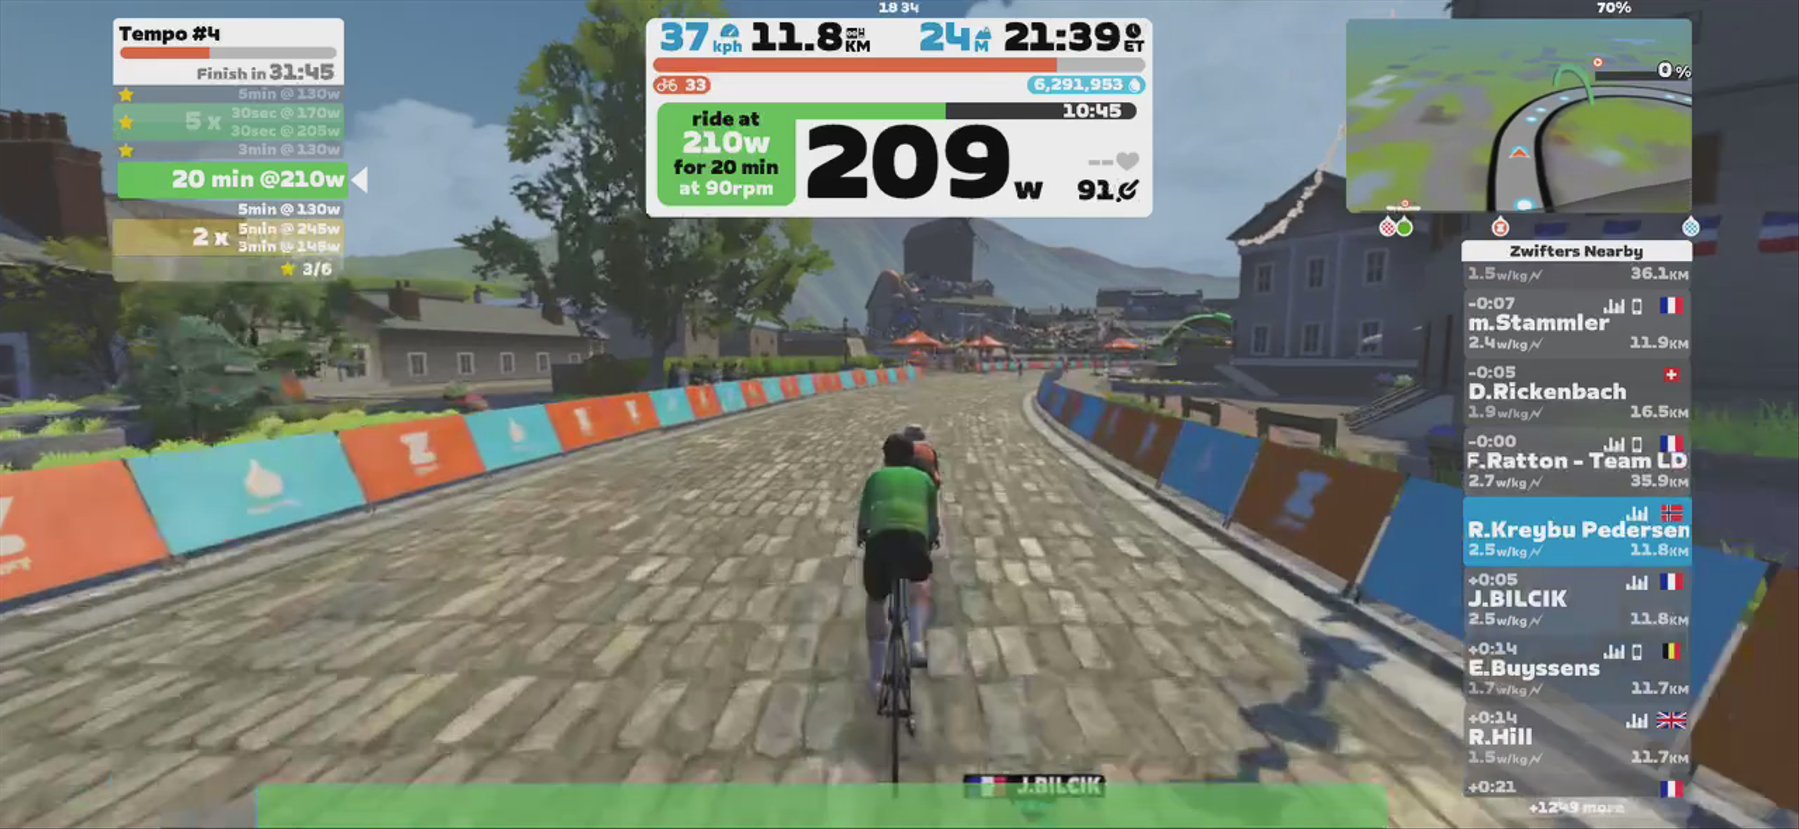 Zwift - Tempo #4 on Sugar Cookie in France